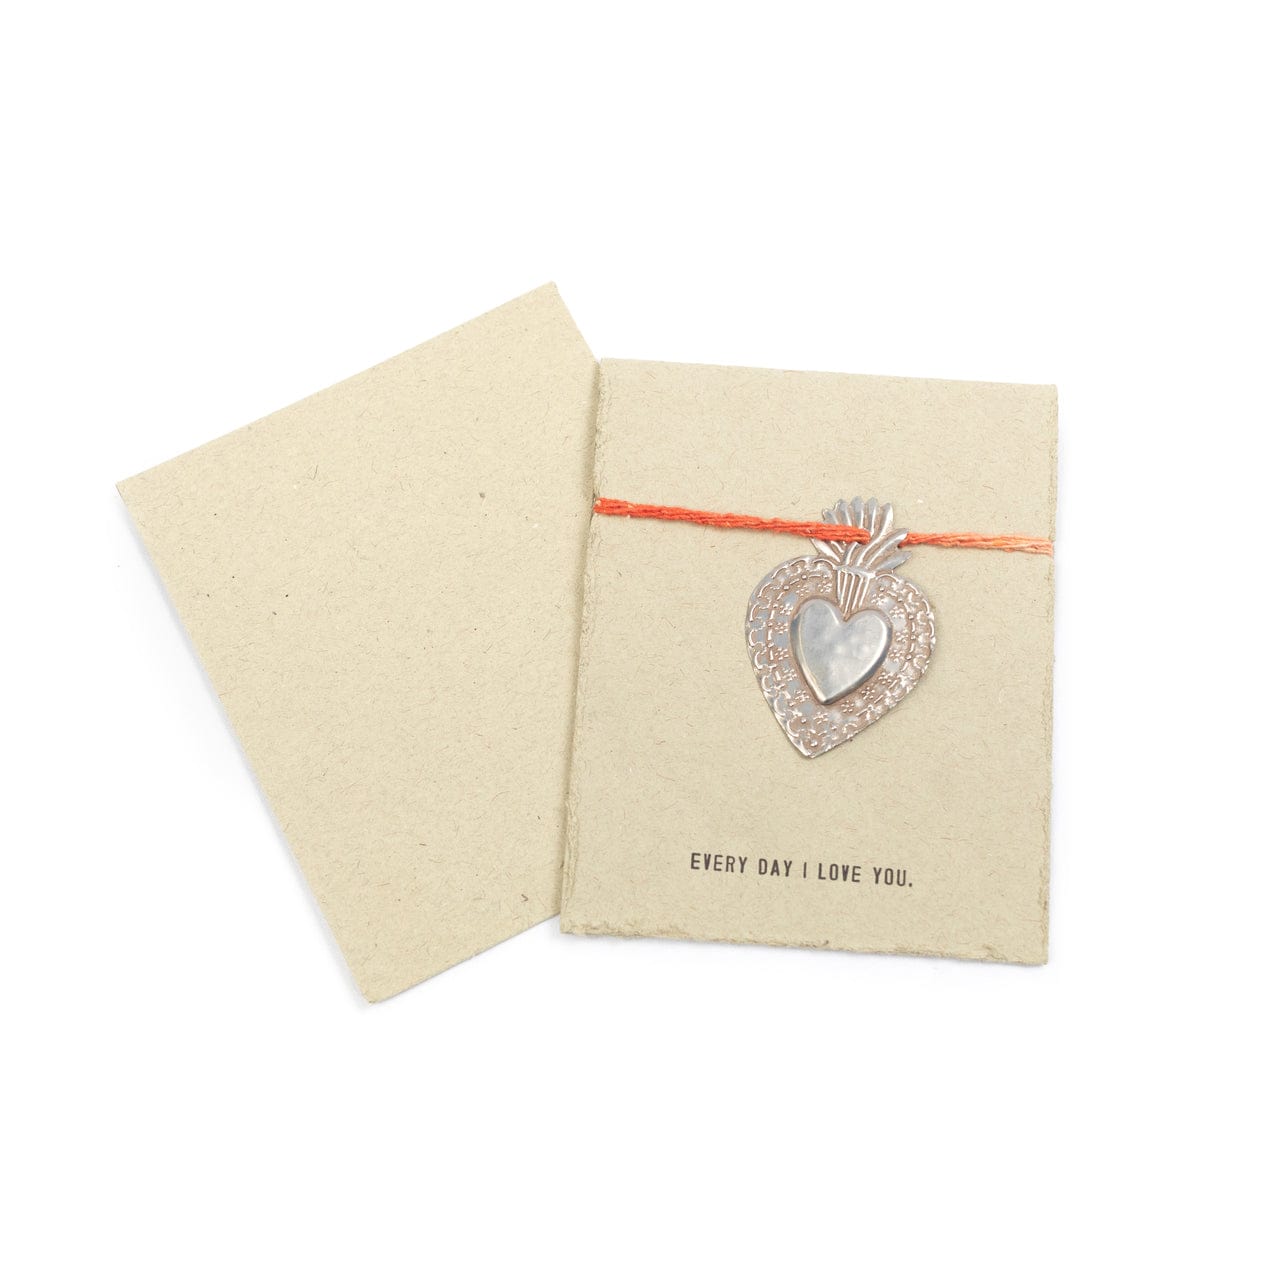 Milagro Heart Cards Sugarboo Designs Greeting Card everyday I love you